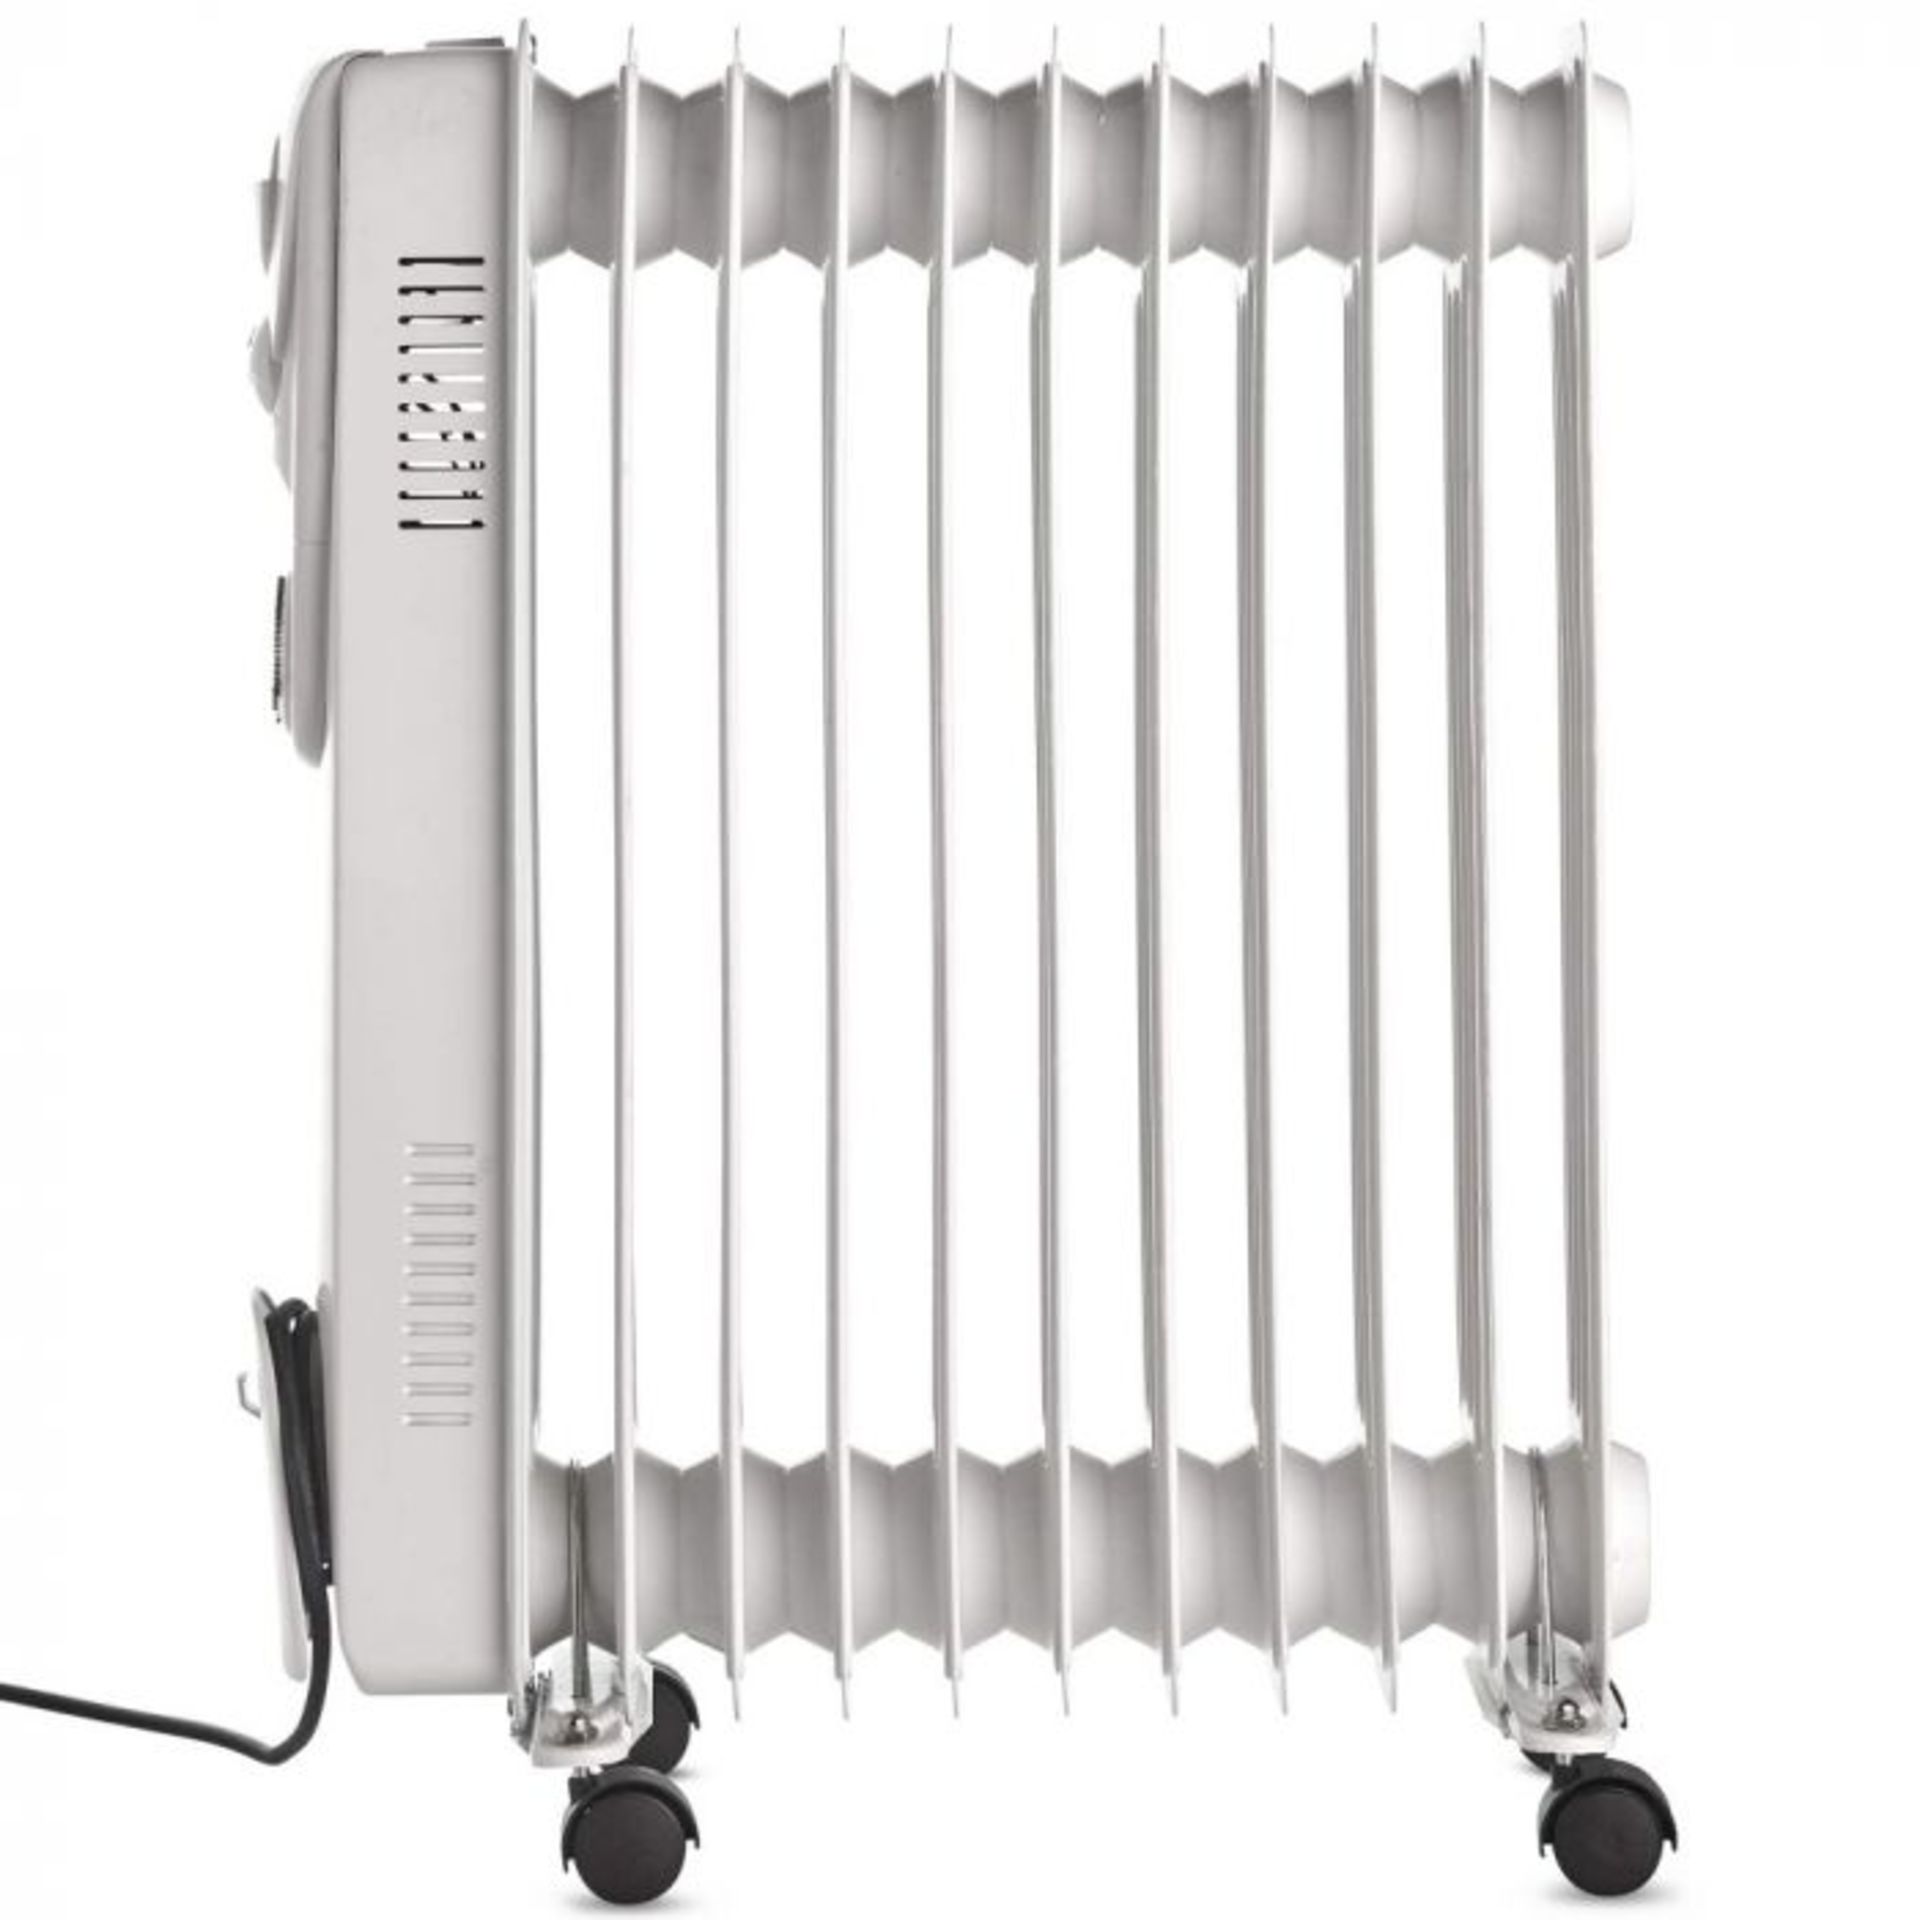 11 Fin 2500W Oil Filled Radiator - White 2500W radiator with 11 oil-filled fins for heating mid to - Image 4 of 5